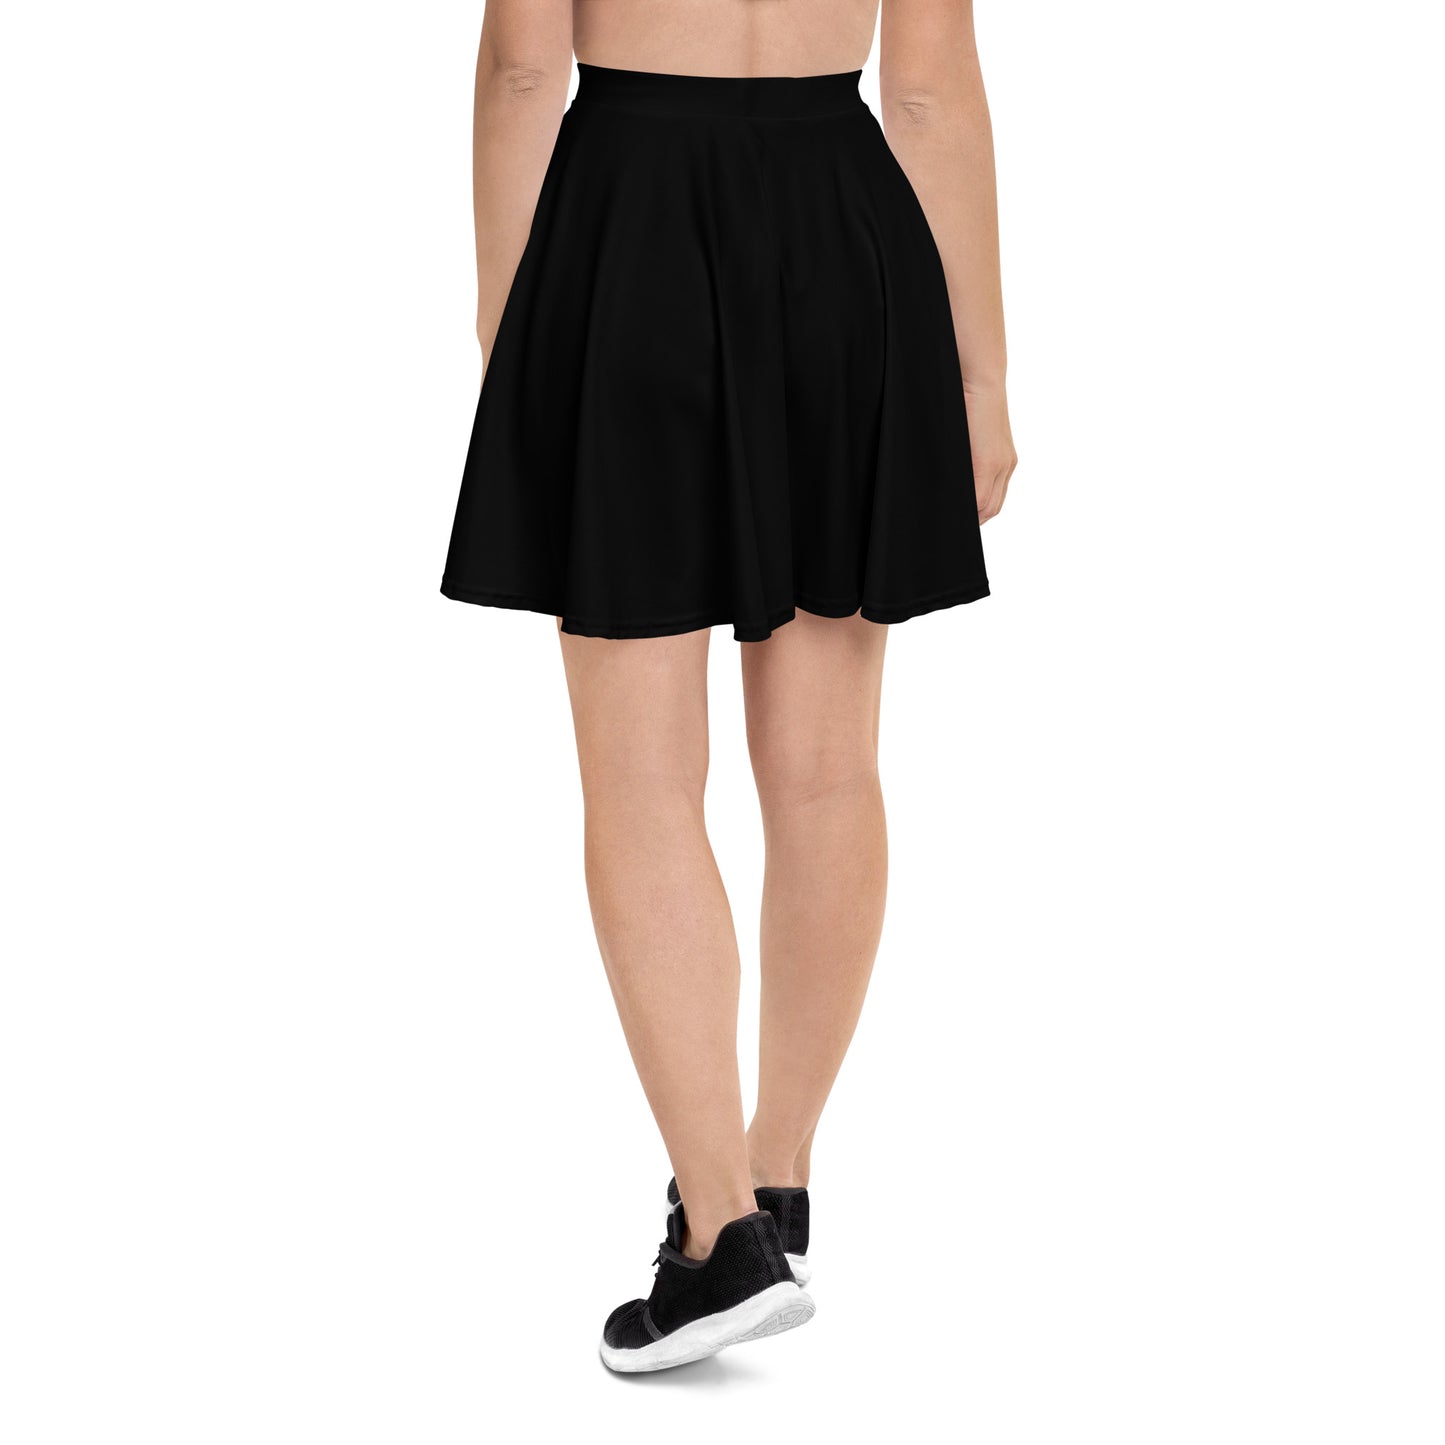 A picture of a woman waist down wearing a Products "Black" Skater Skirt and black shoes - back side